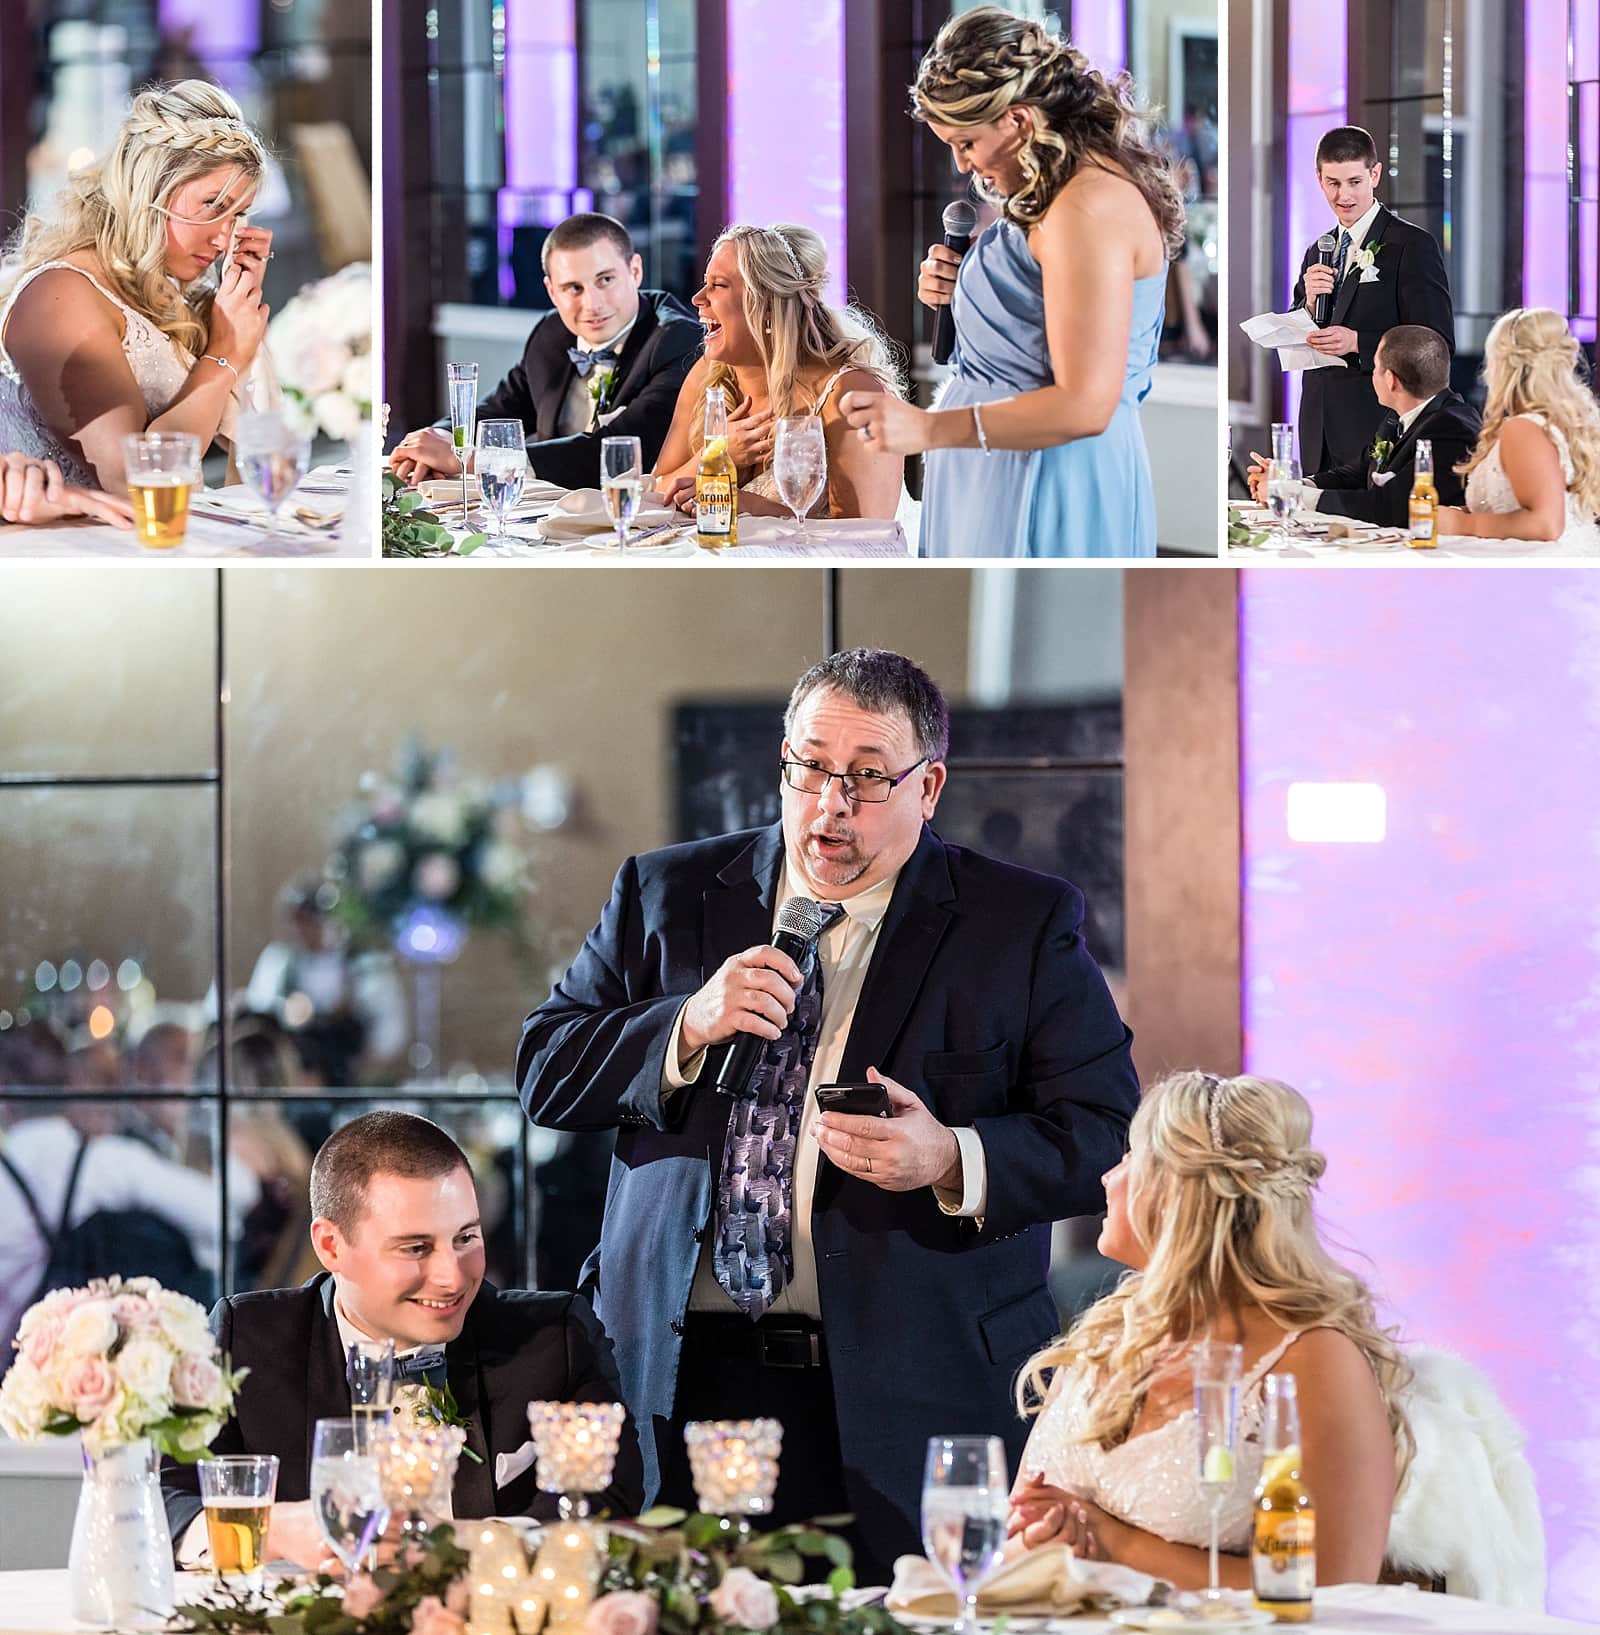 Wedding Toasts & Blessing at a Sheraton Valley Forge wedding